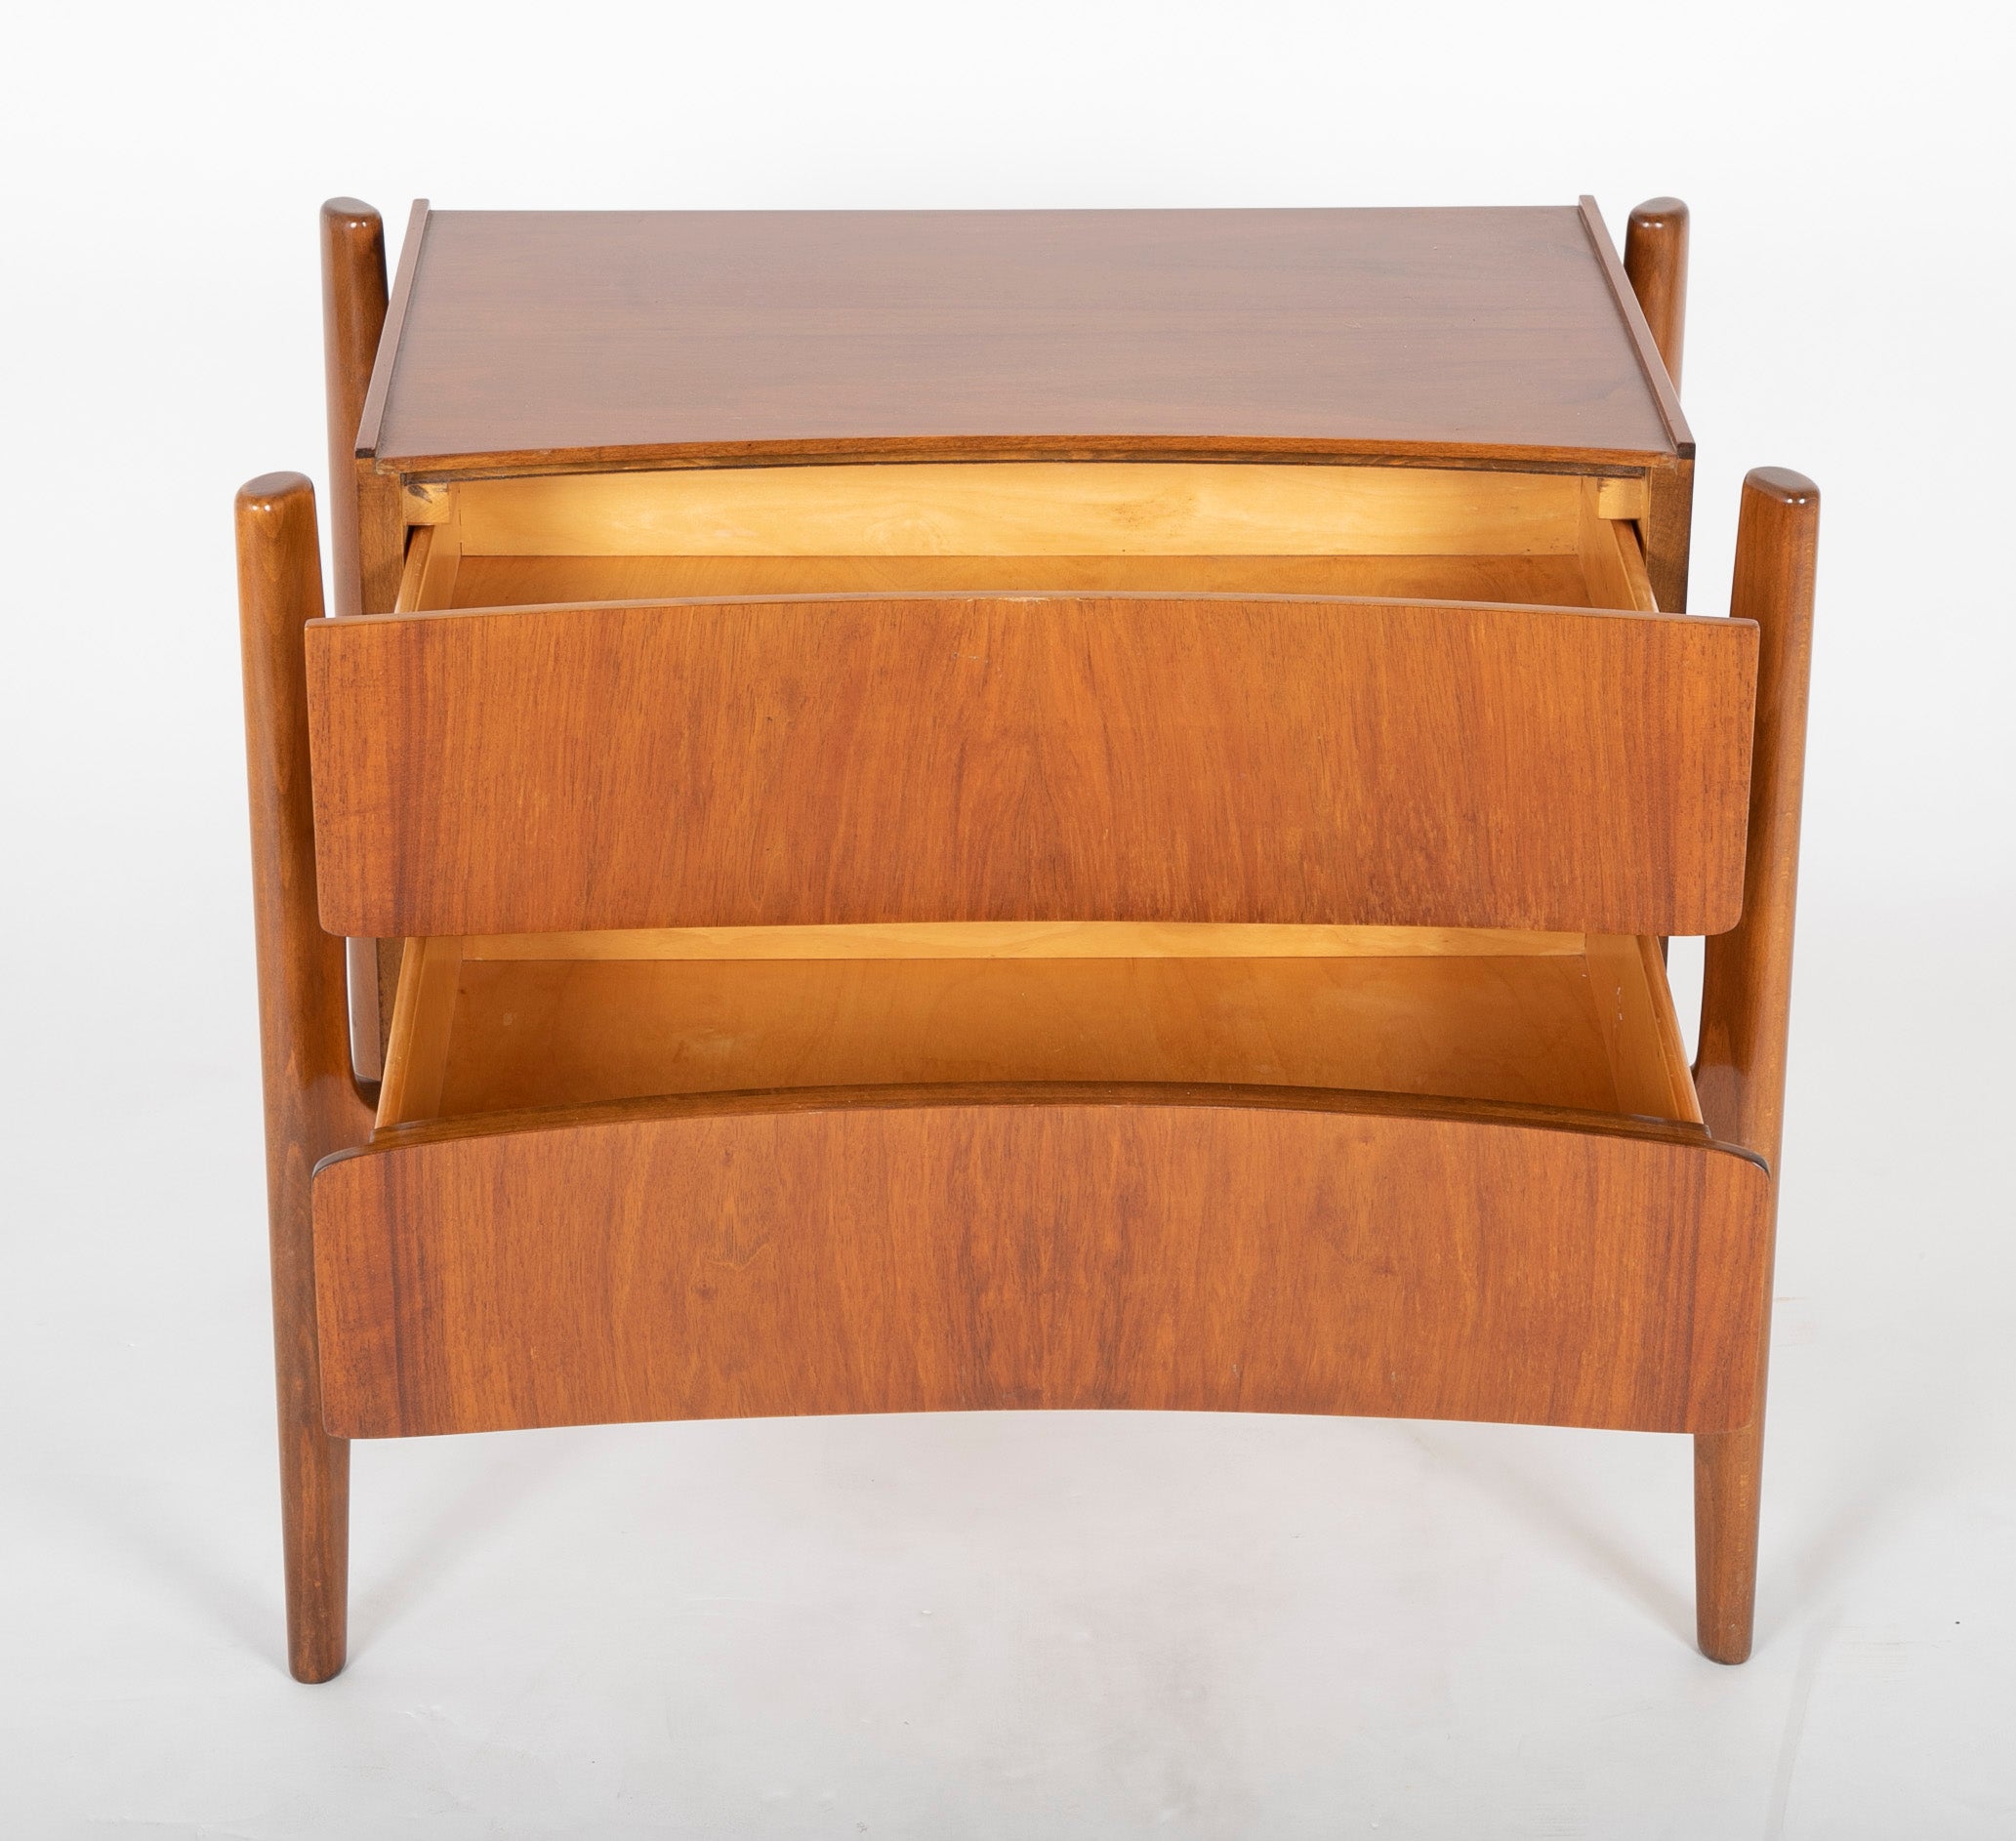 Pair of Edmund Spence Side Tables in Walnut